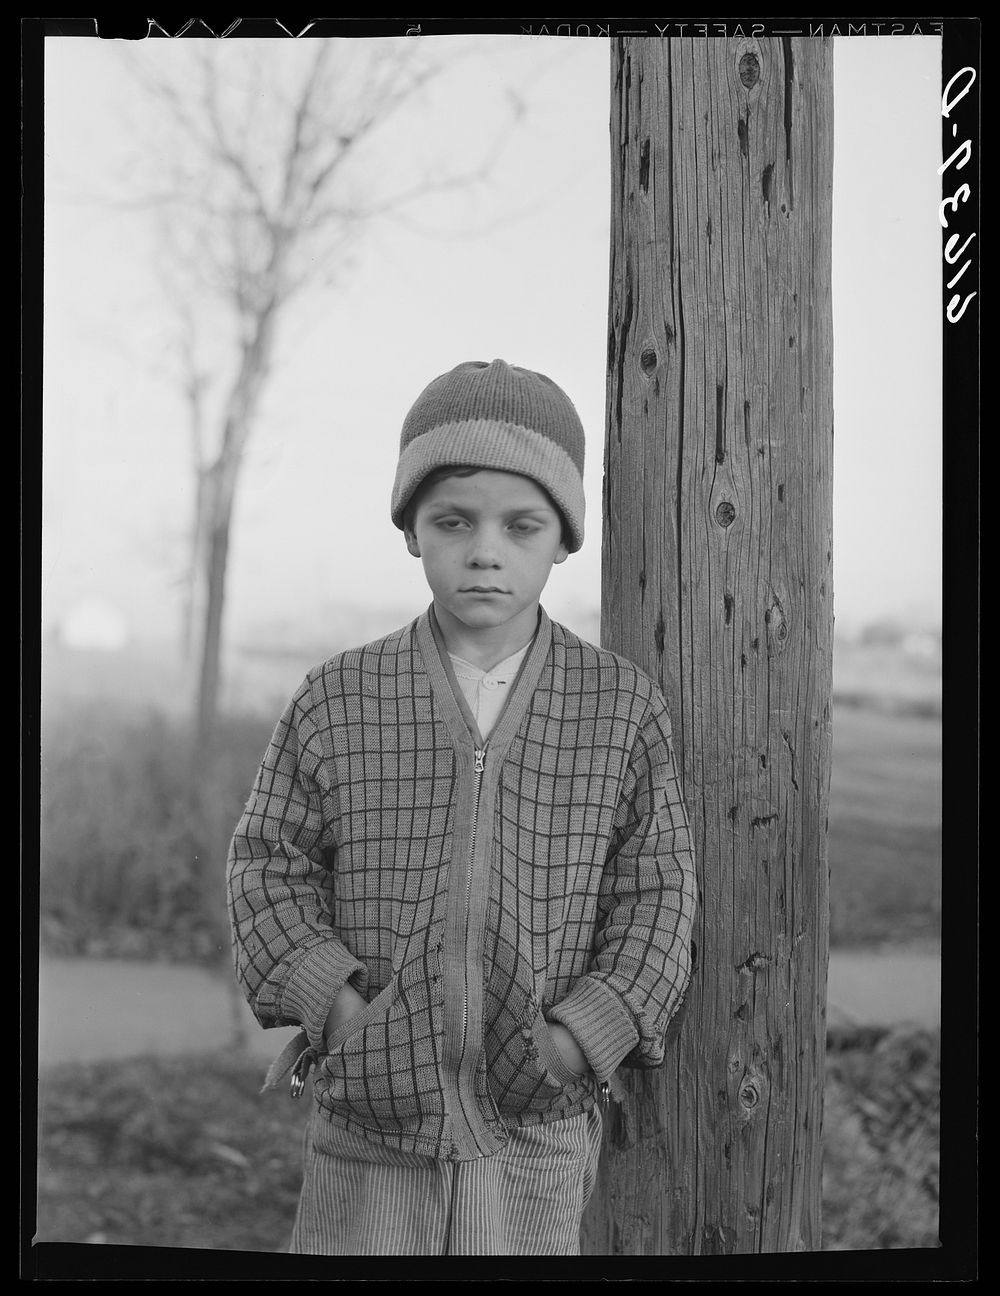 [Untitled photo, possibly related to: Boy who lives in Aberdeen, South Dakota]. Sourced from the Library of Congress.